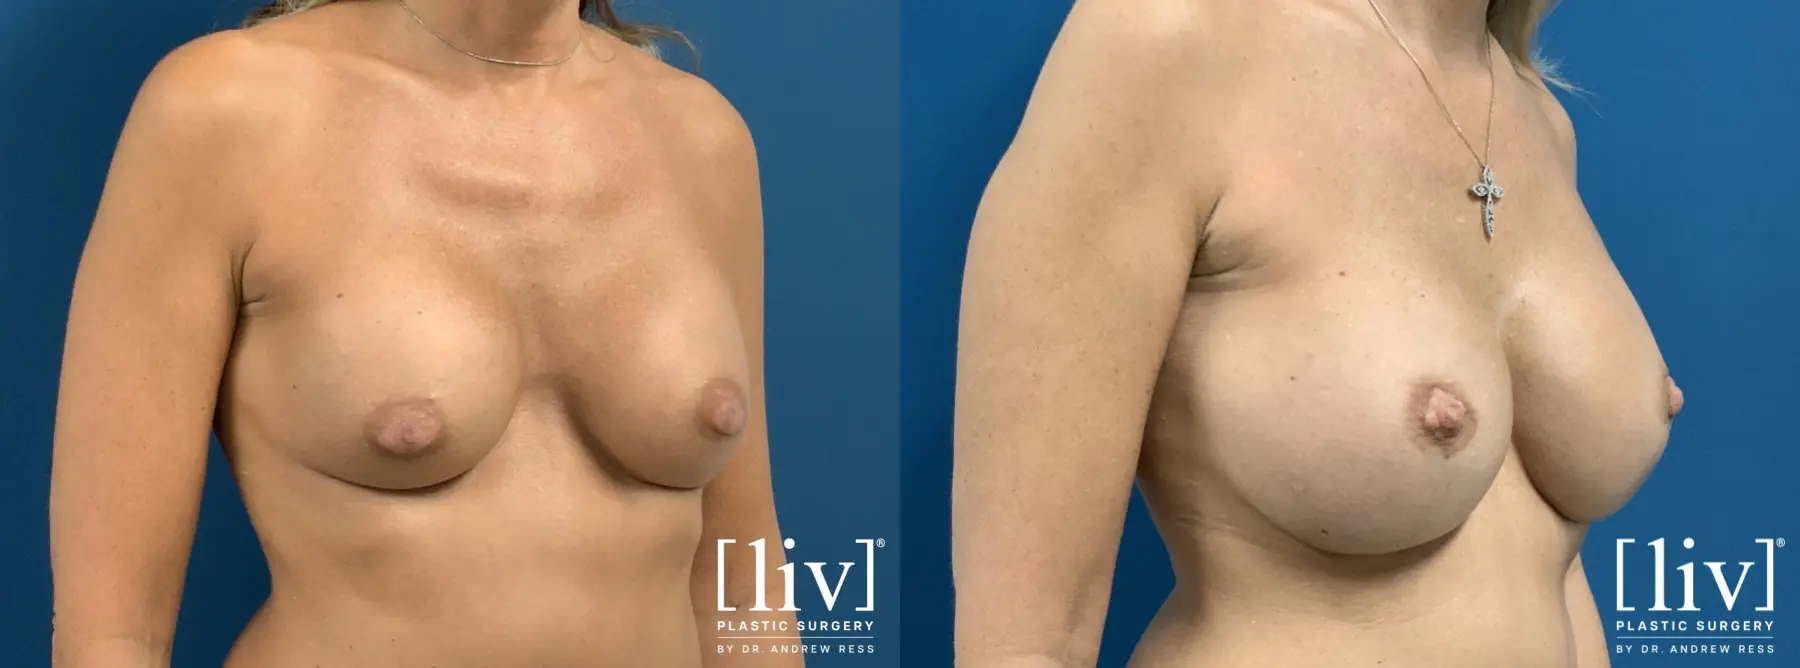 Breast Implant Exchange - Before and After 4